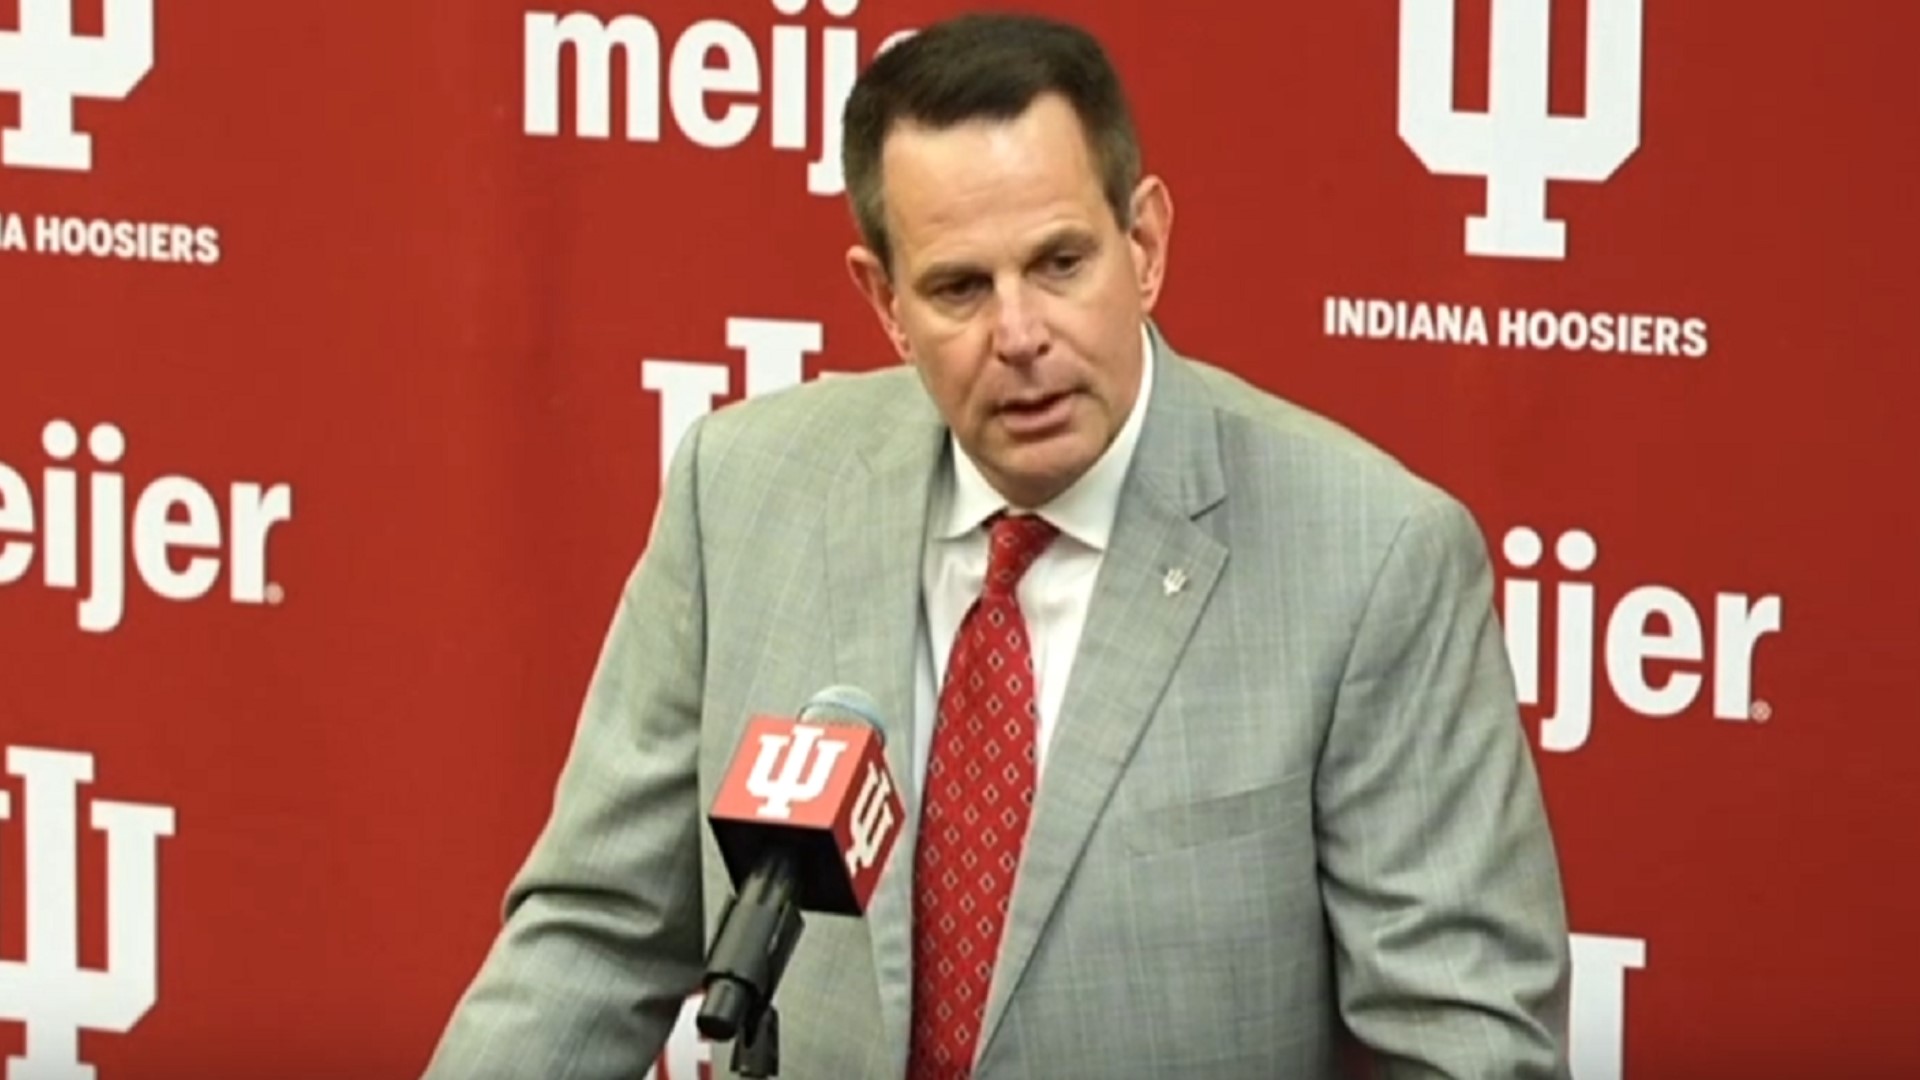 Watch as Curt Cignetti gives his first address as the Indiana Hoosiers head football coach.